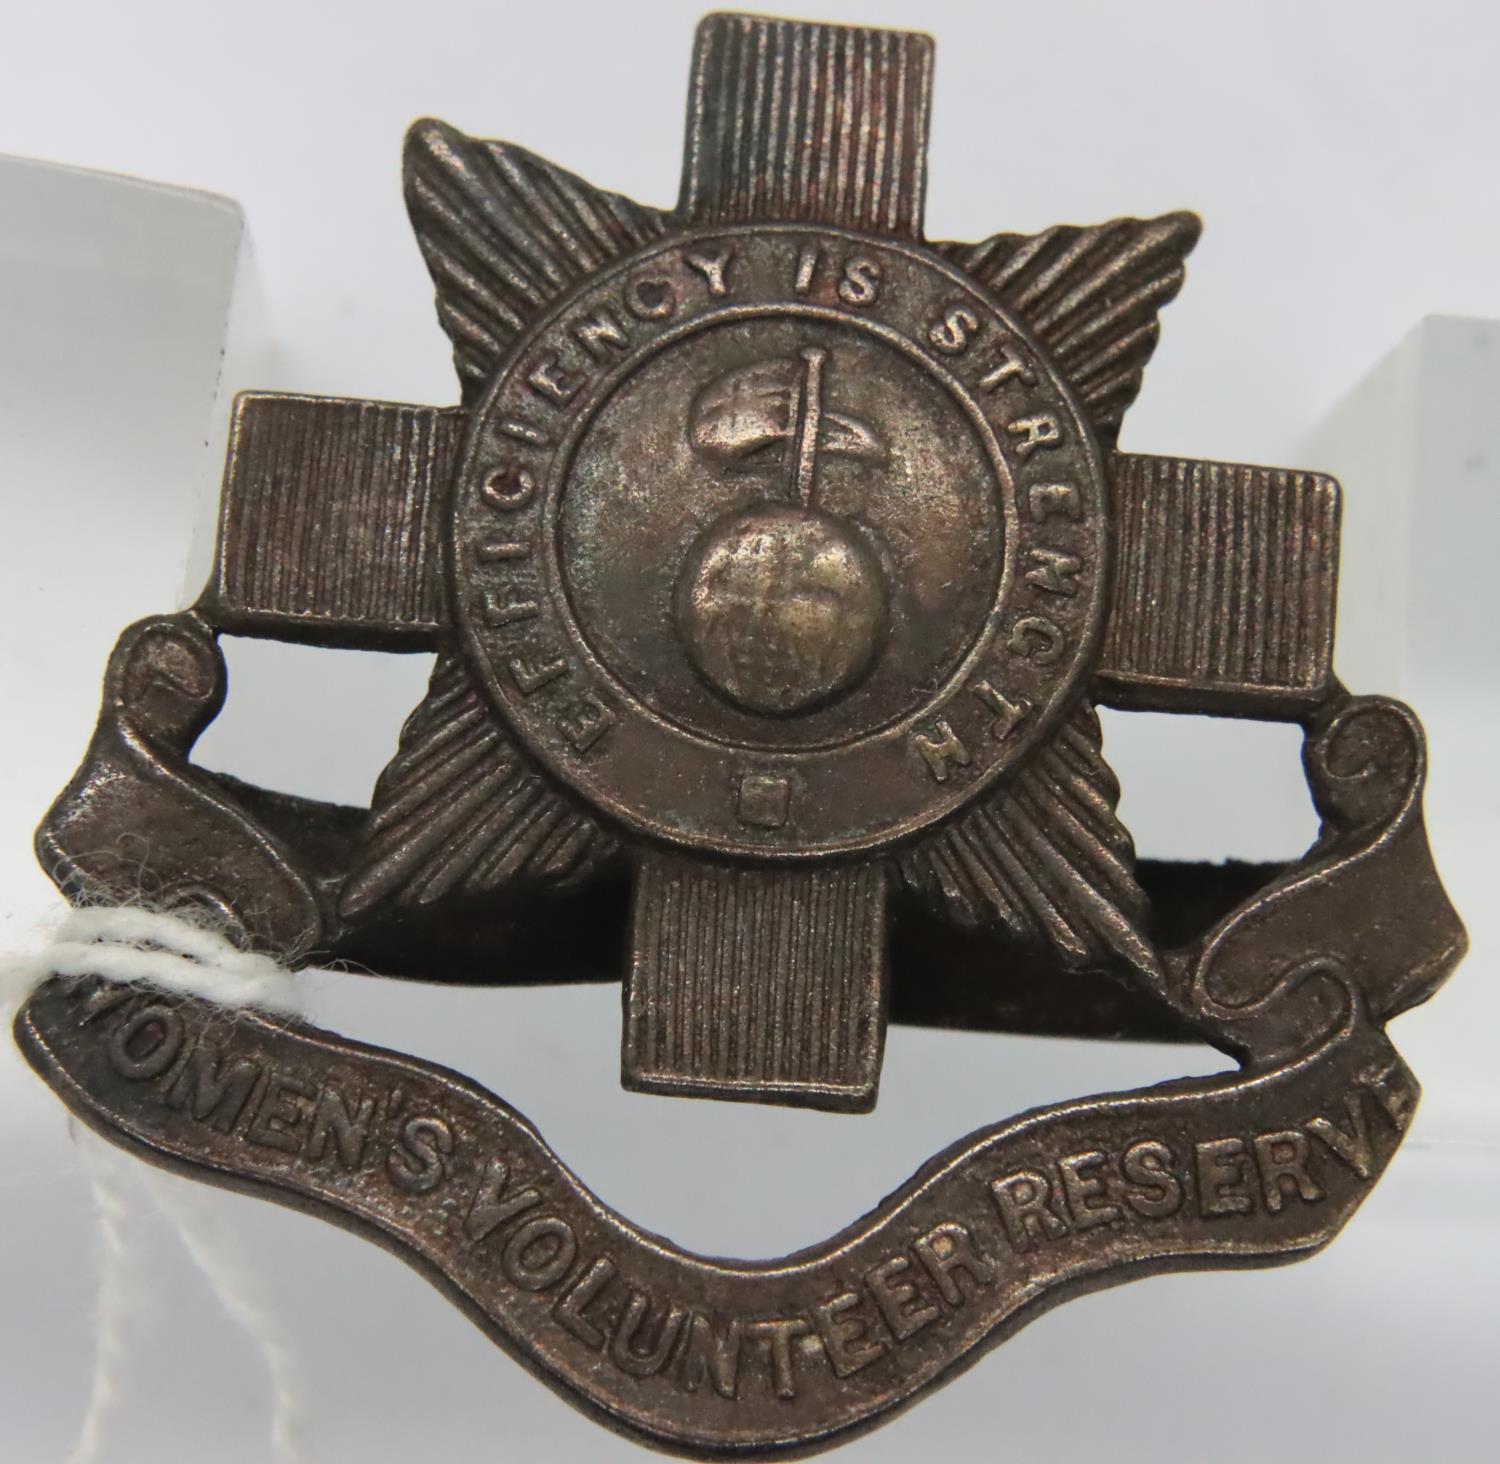 WWI Womans Volunteer Reserve lapel pin, formed December 1914. P&P Group 1 (£14+VAT for the first lot